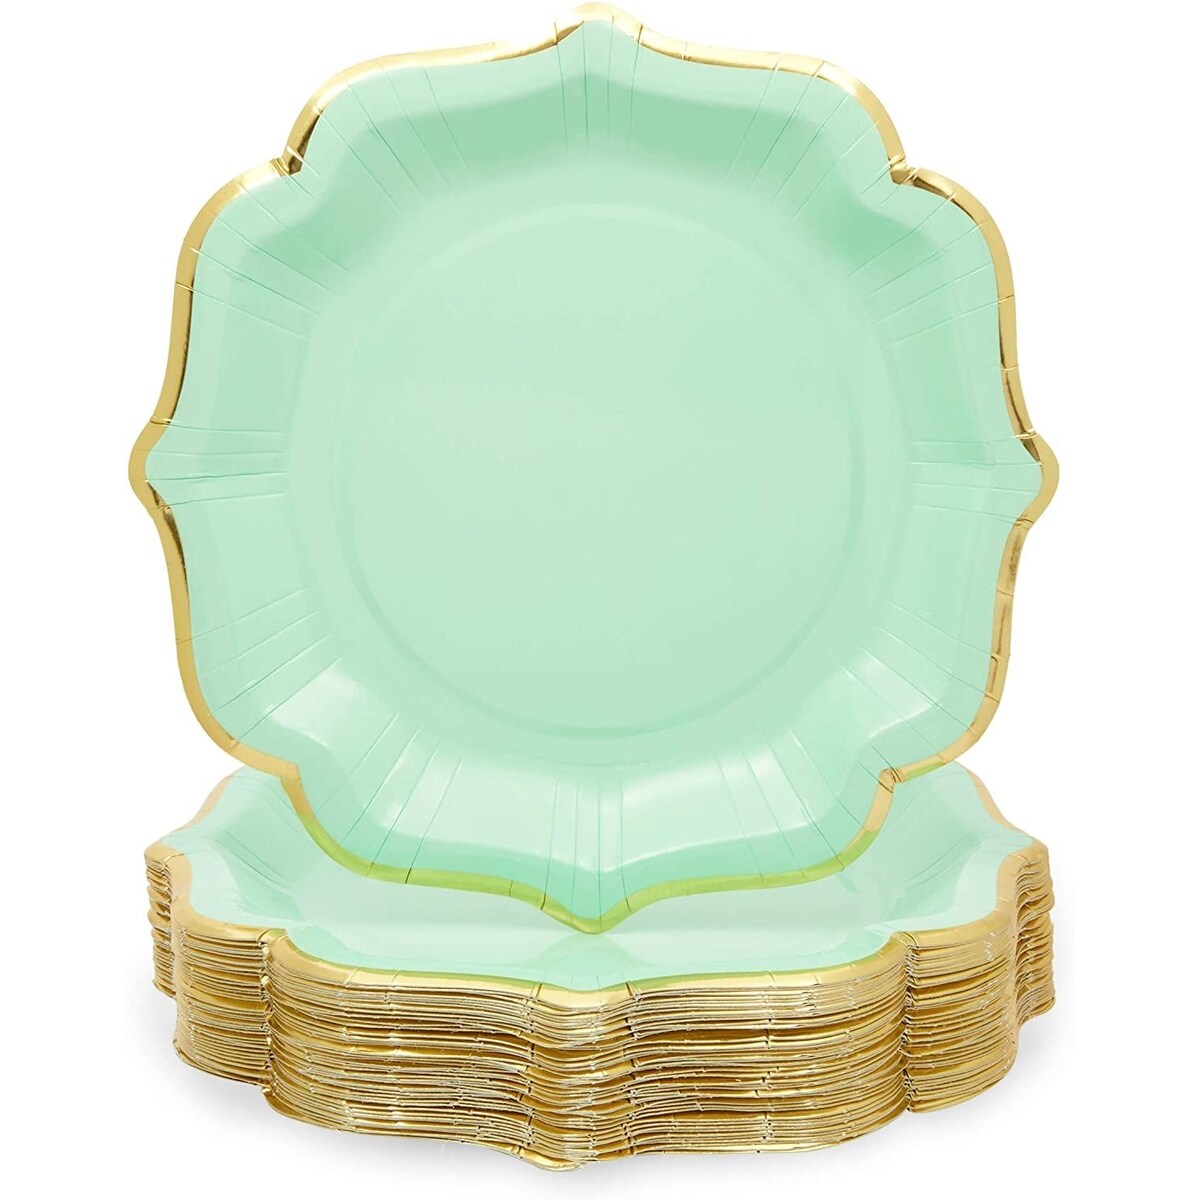 48-Pack Mint Green Paper Plates with Scalloped Edge for Birthday Party (9 in)